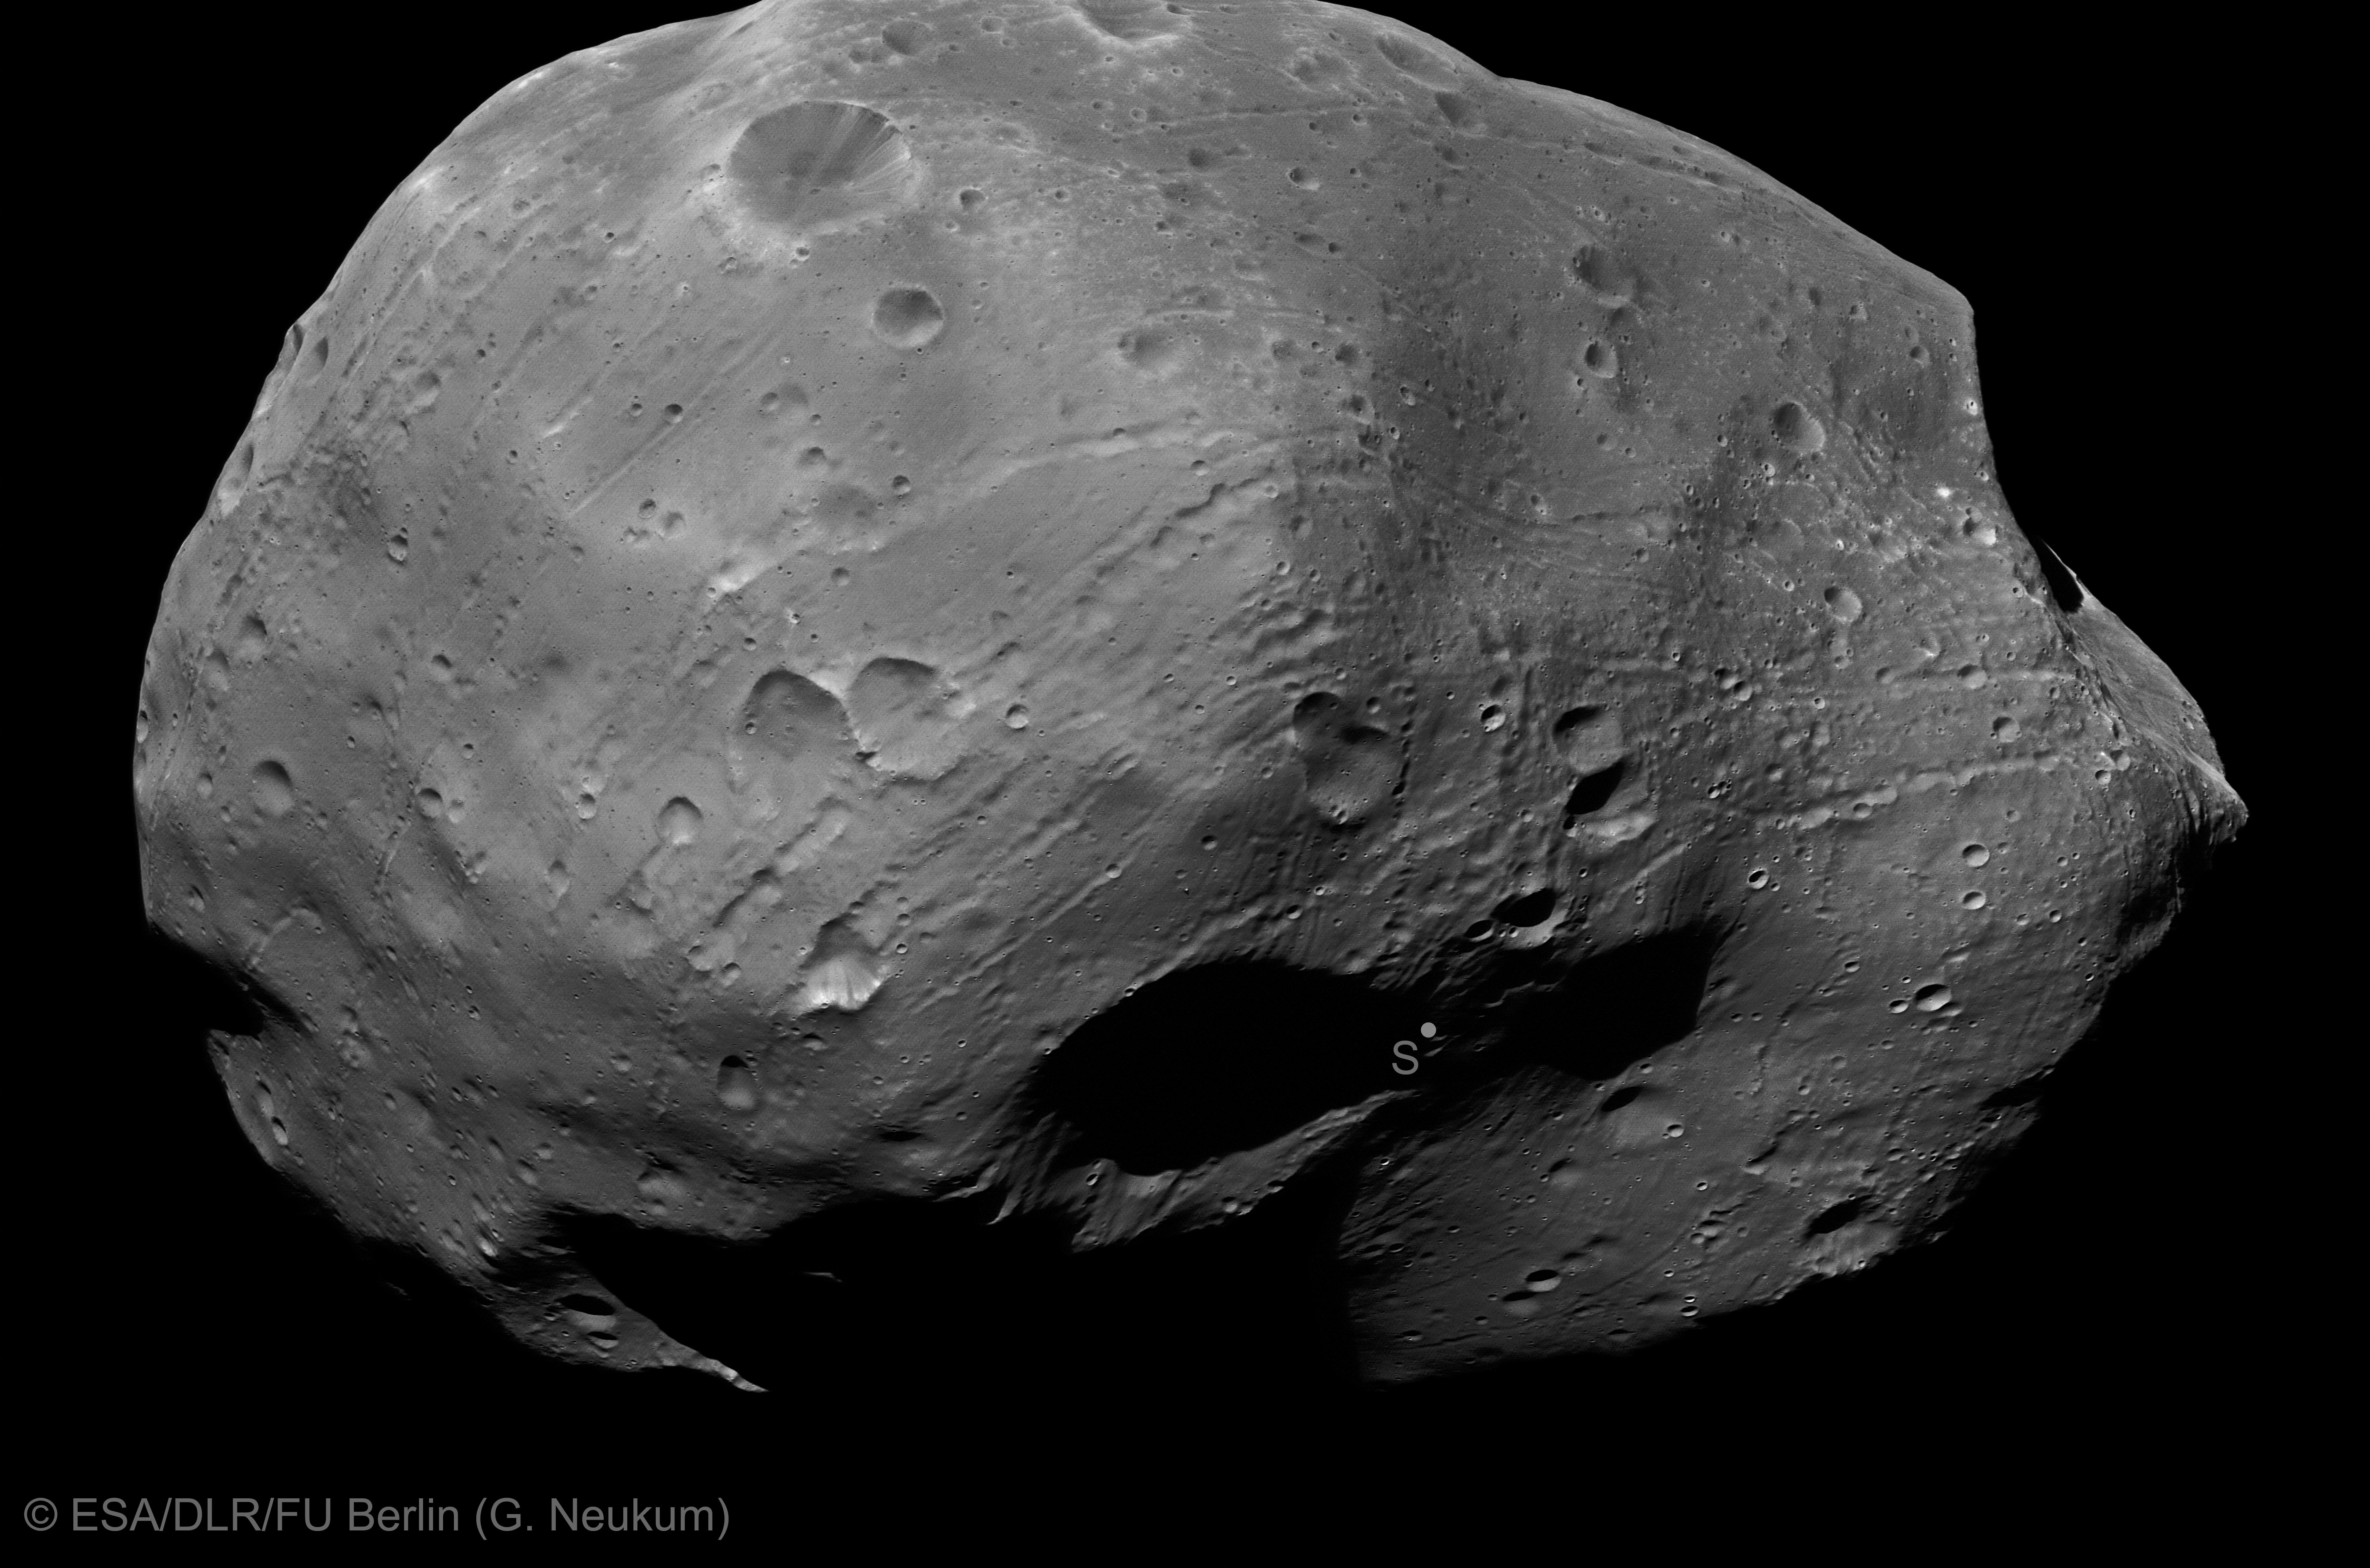 ESA Science & Technology: Mars Express view of Phobos (9 January 2011)